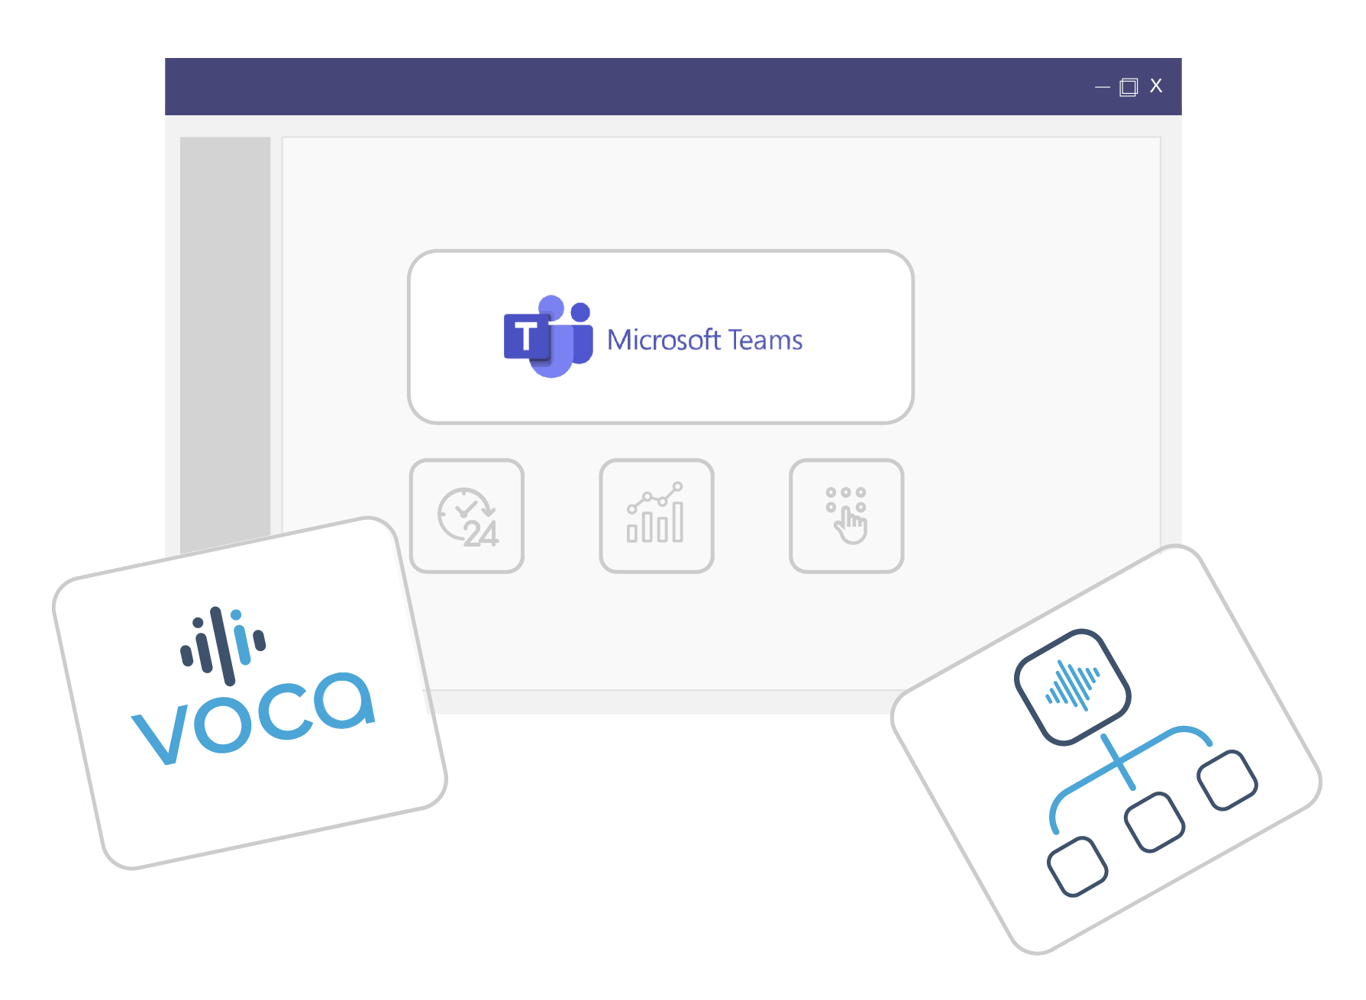 Voca, AudioCodes Agile Conversational IVR, seamlessly connects to Microsoft Teams